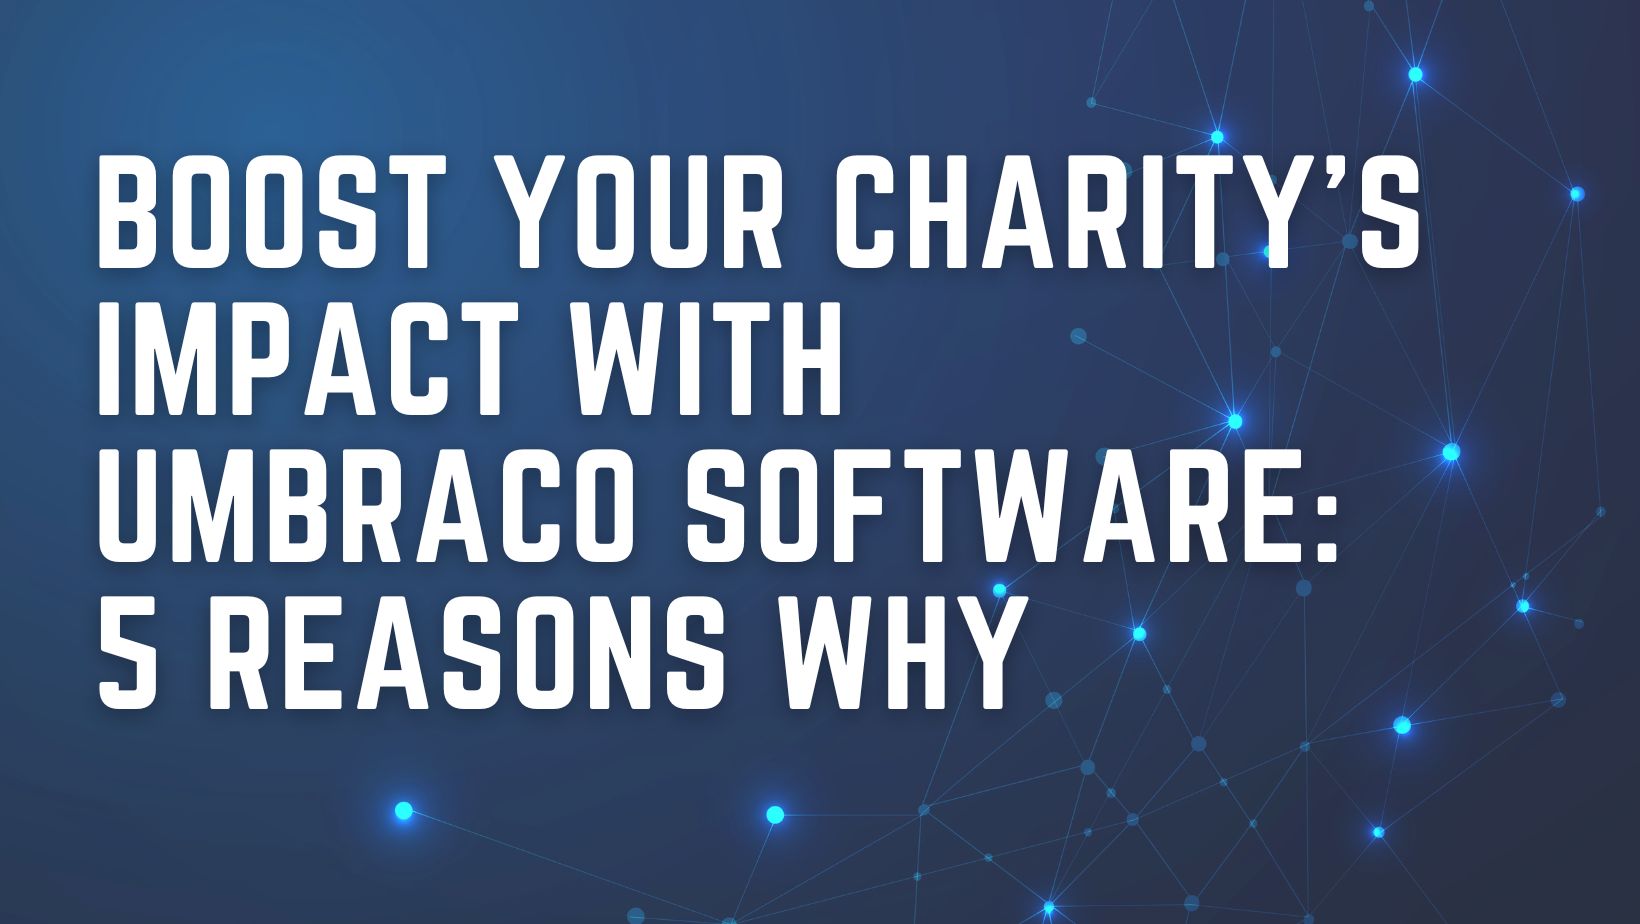 Boost Your Charity's Impact with Umbraco Software: 5 Reasons Why